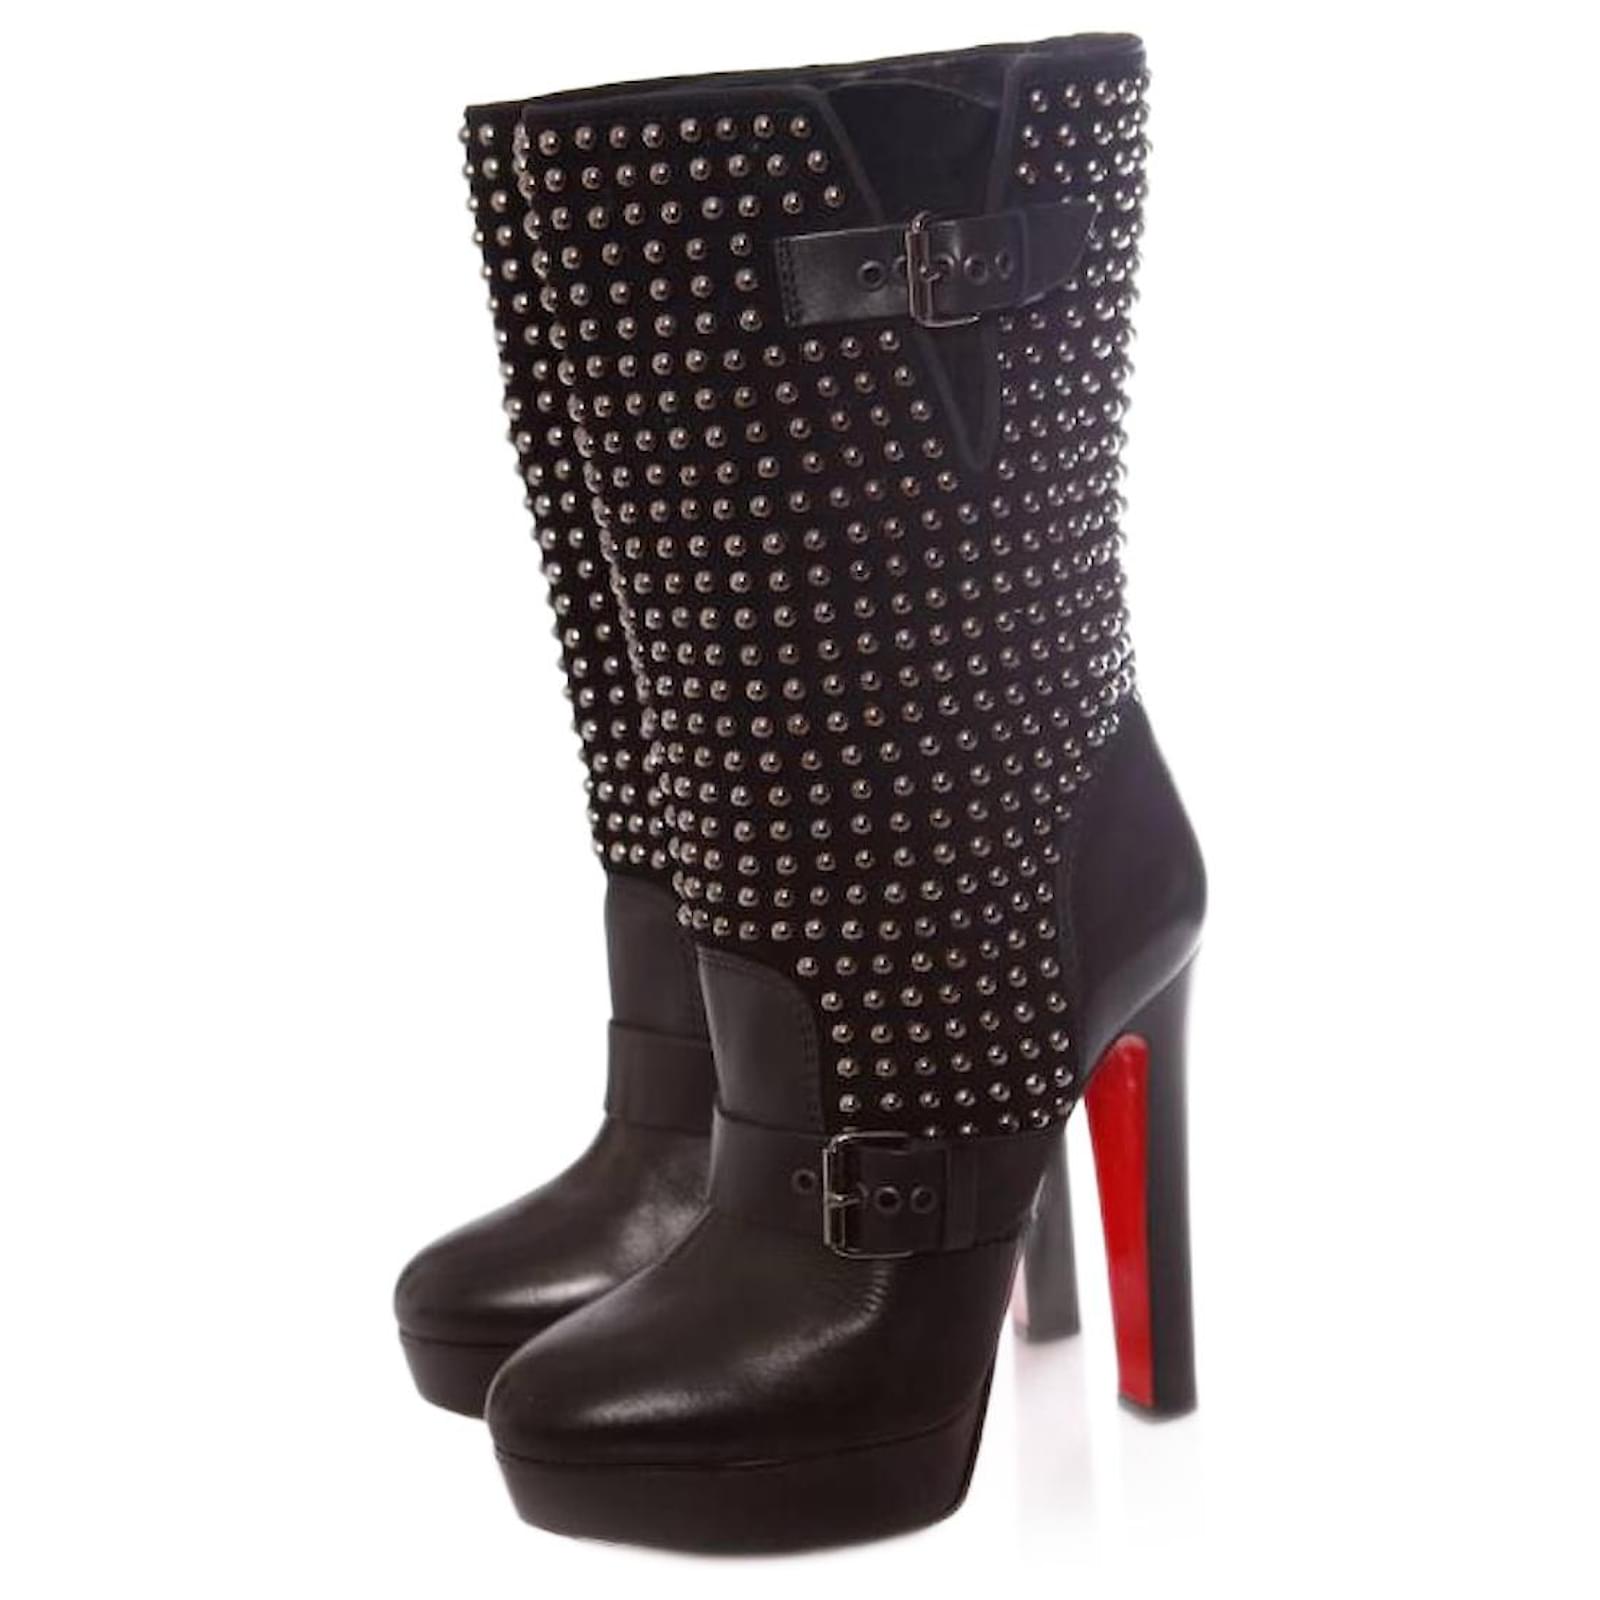 CHRISTIAN LOUBOUTIN, Black leather platform boots with silver